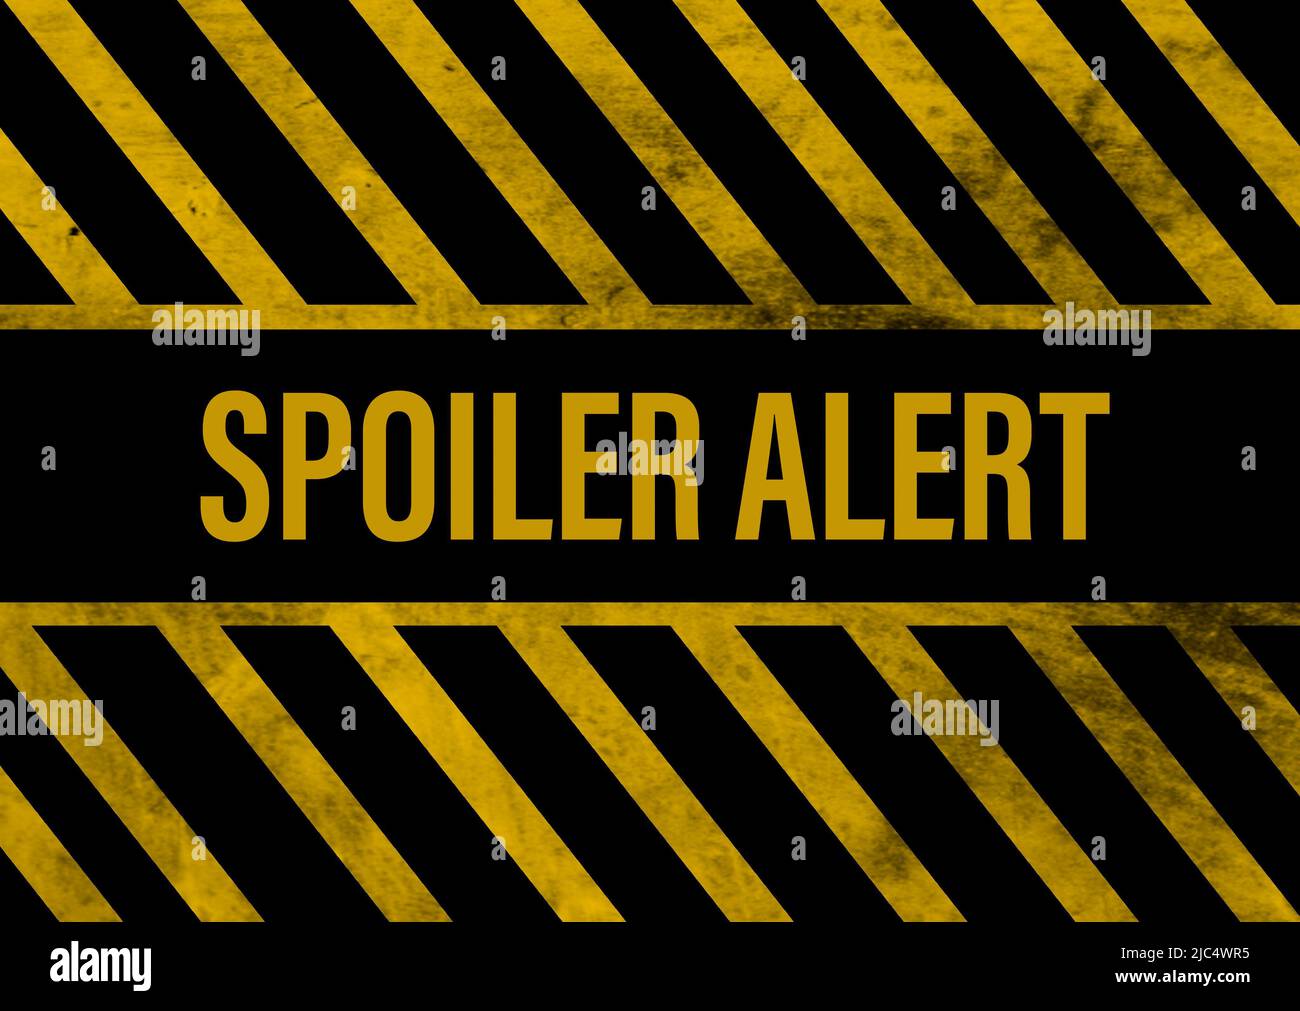 'spoiler alert' typography sign, Illustration image, black and yellow stripes pattern Stock Photo